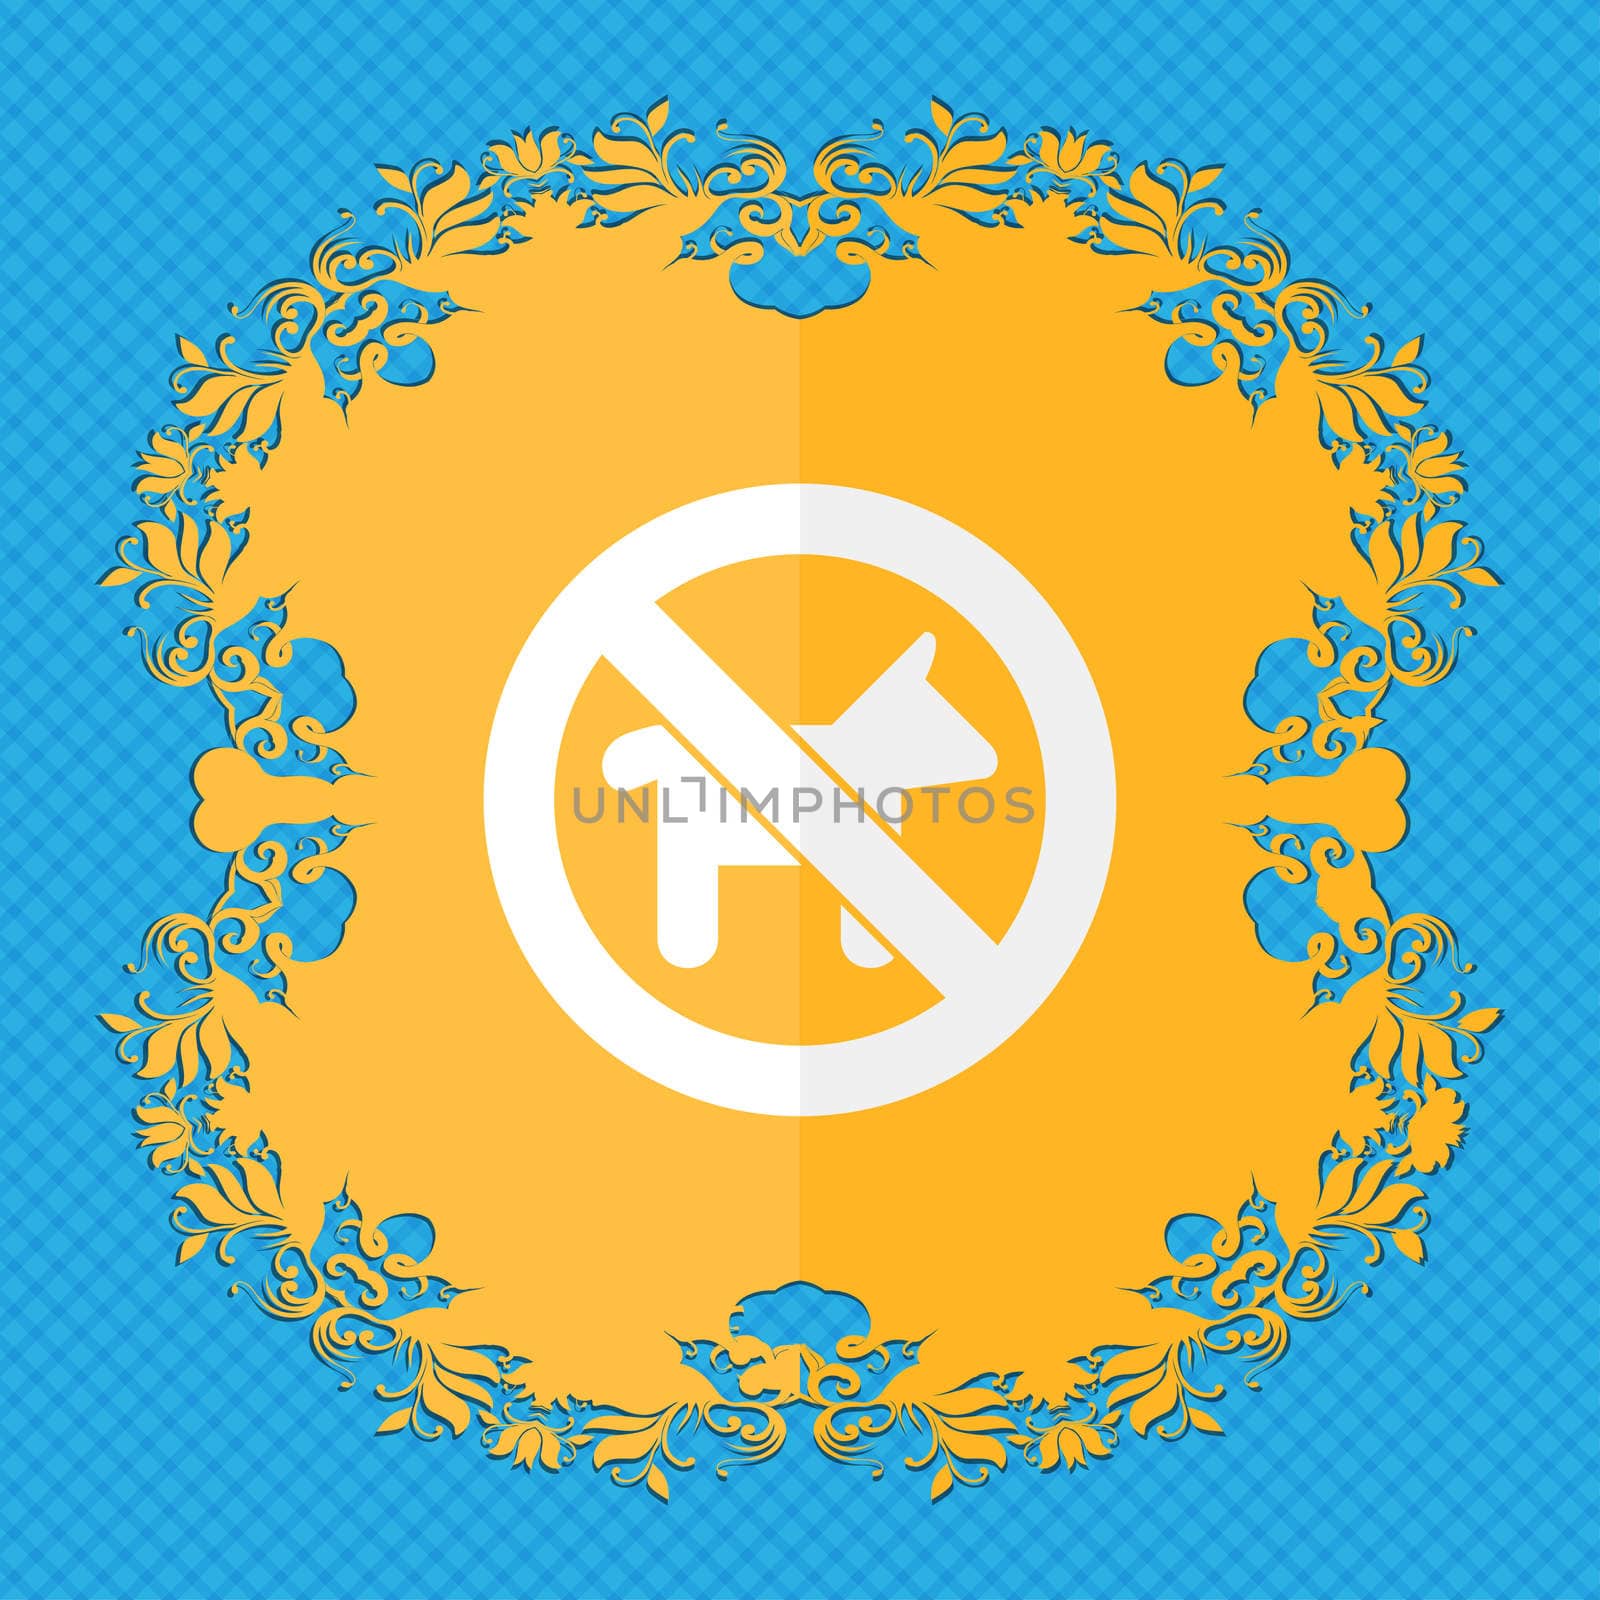 dog walking is prohibited. Floral flat design on a blue abstract background with place for your text. illustration